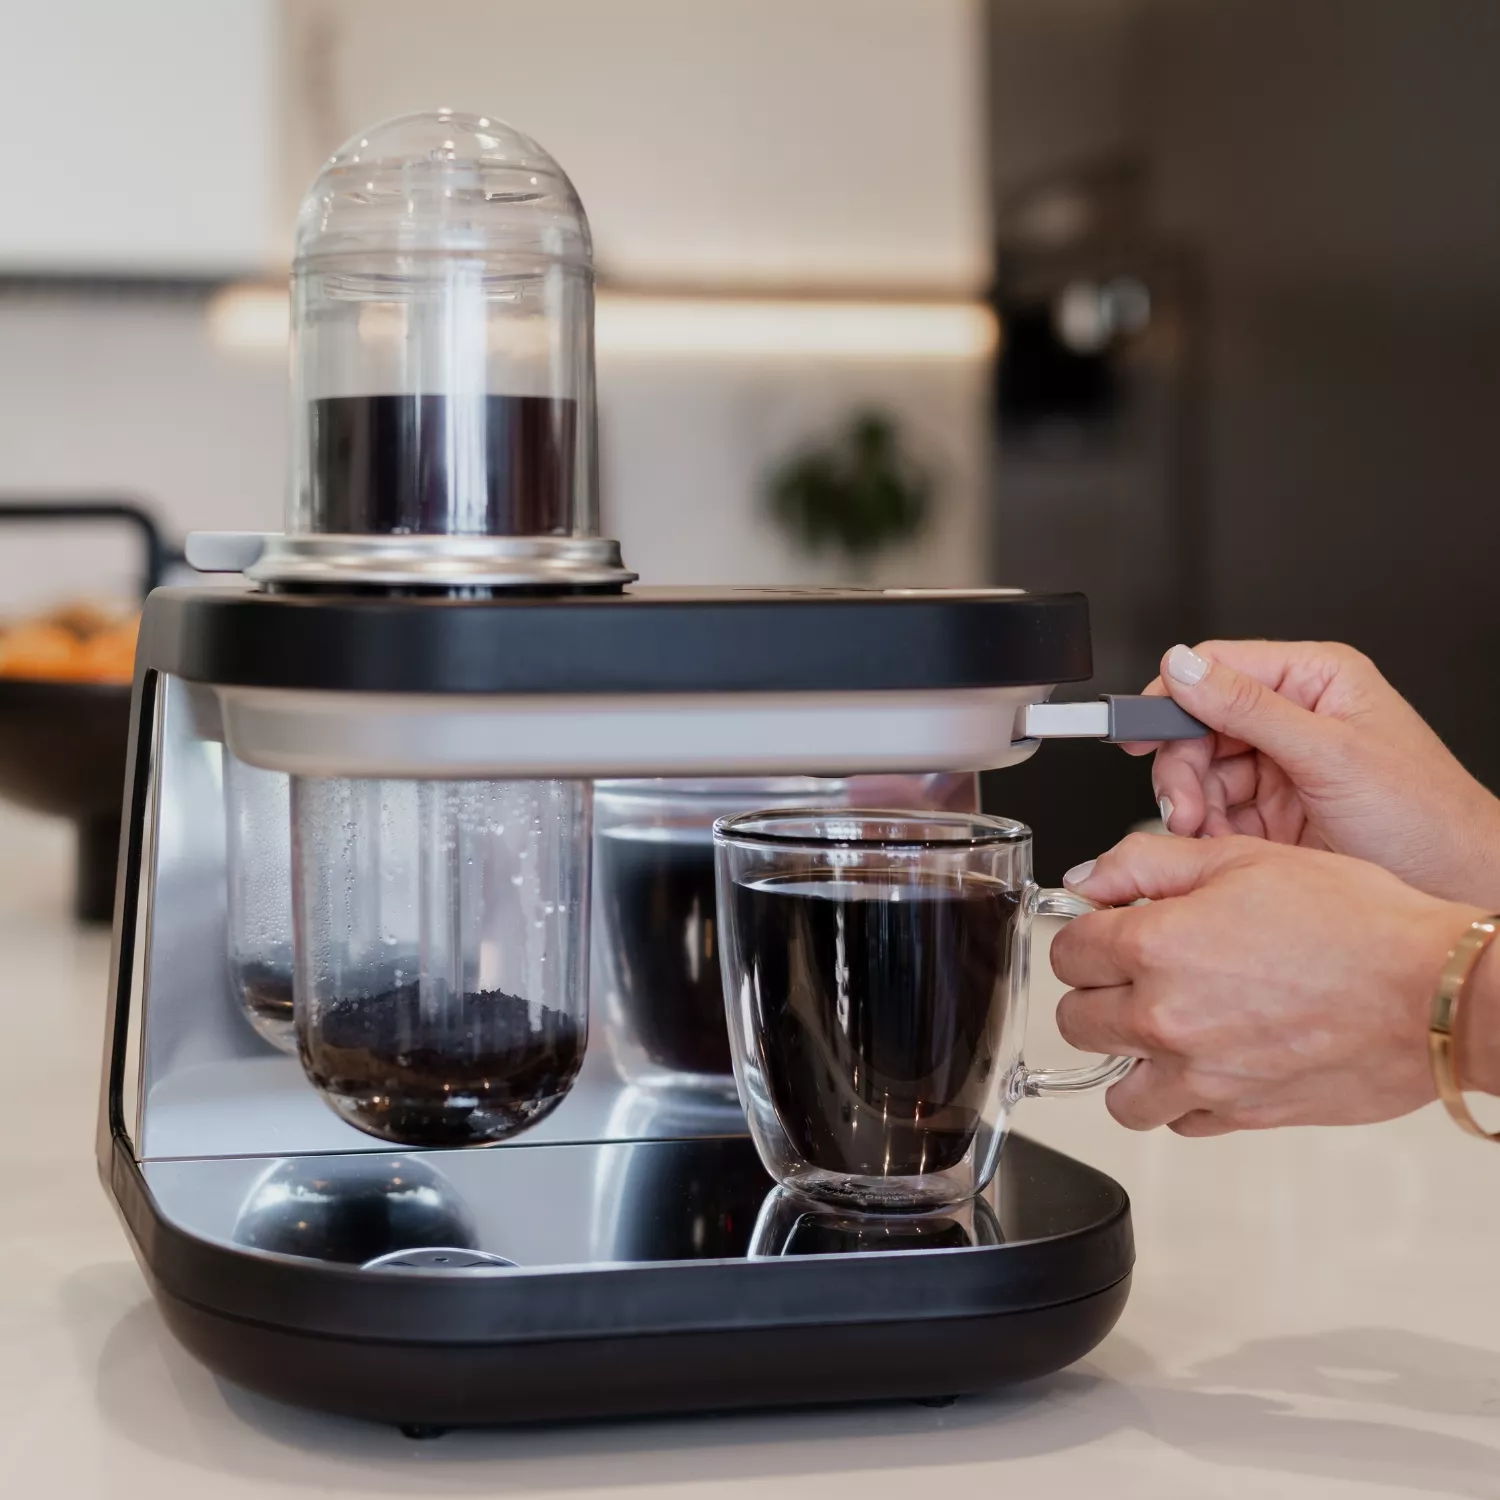 Tiger Siphonysta Automated Siphon Brewing Coffee Maker